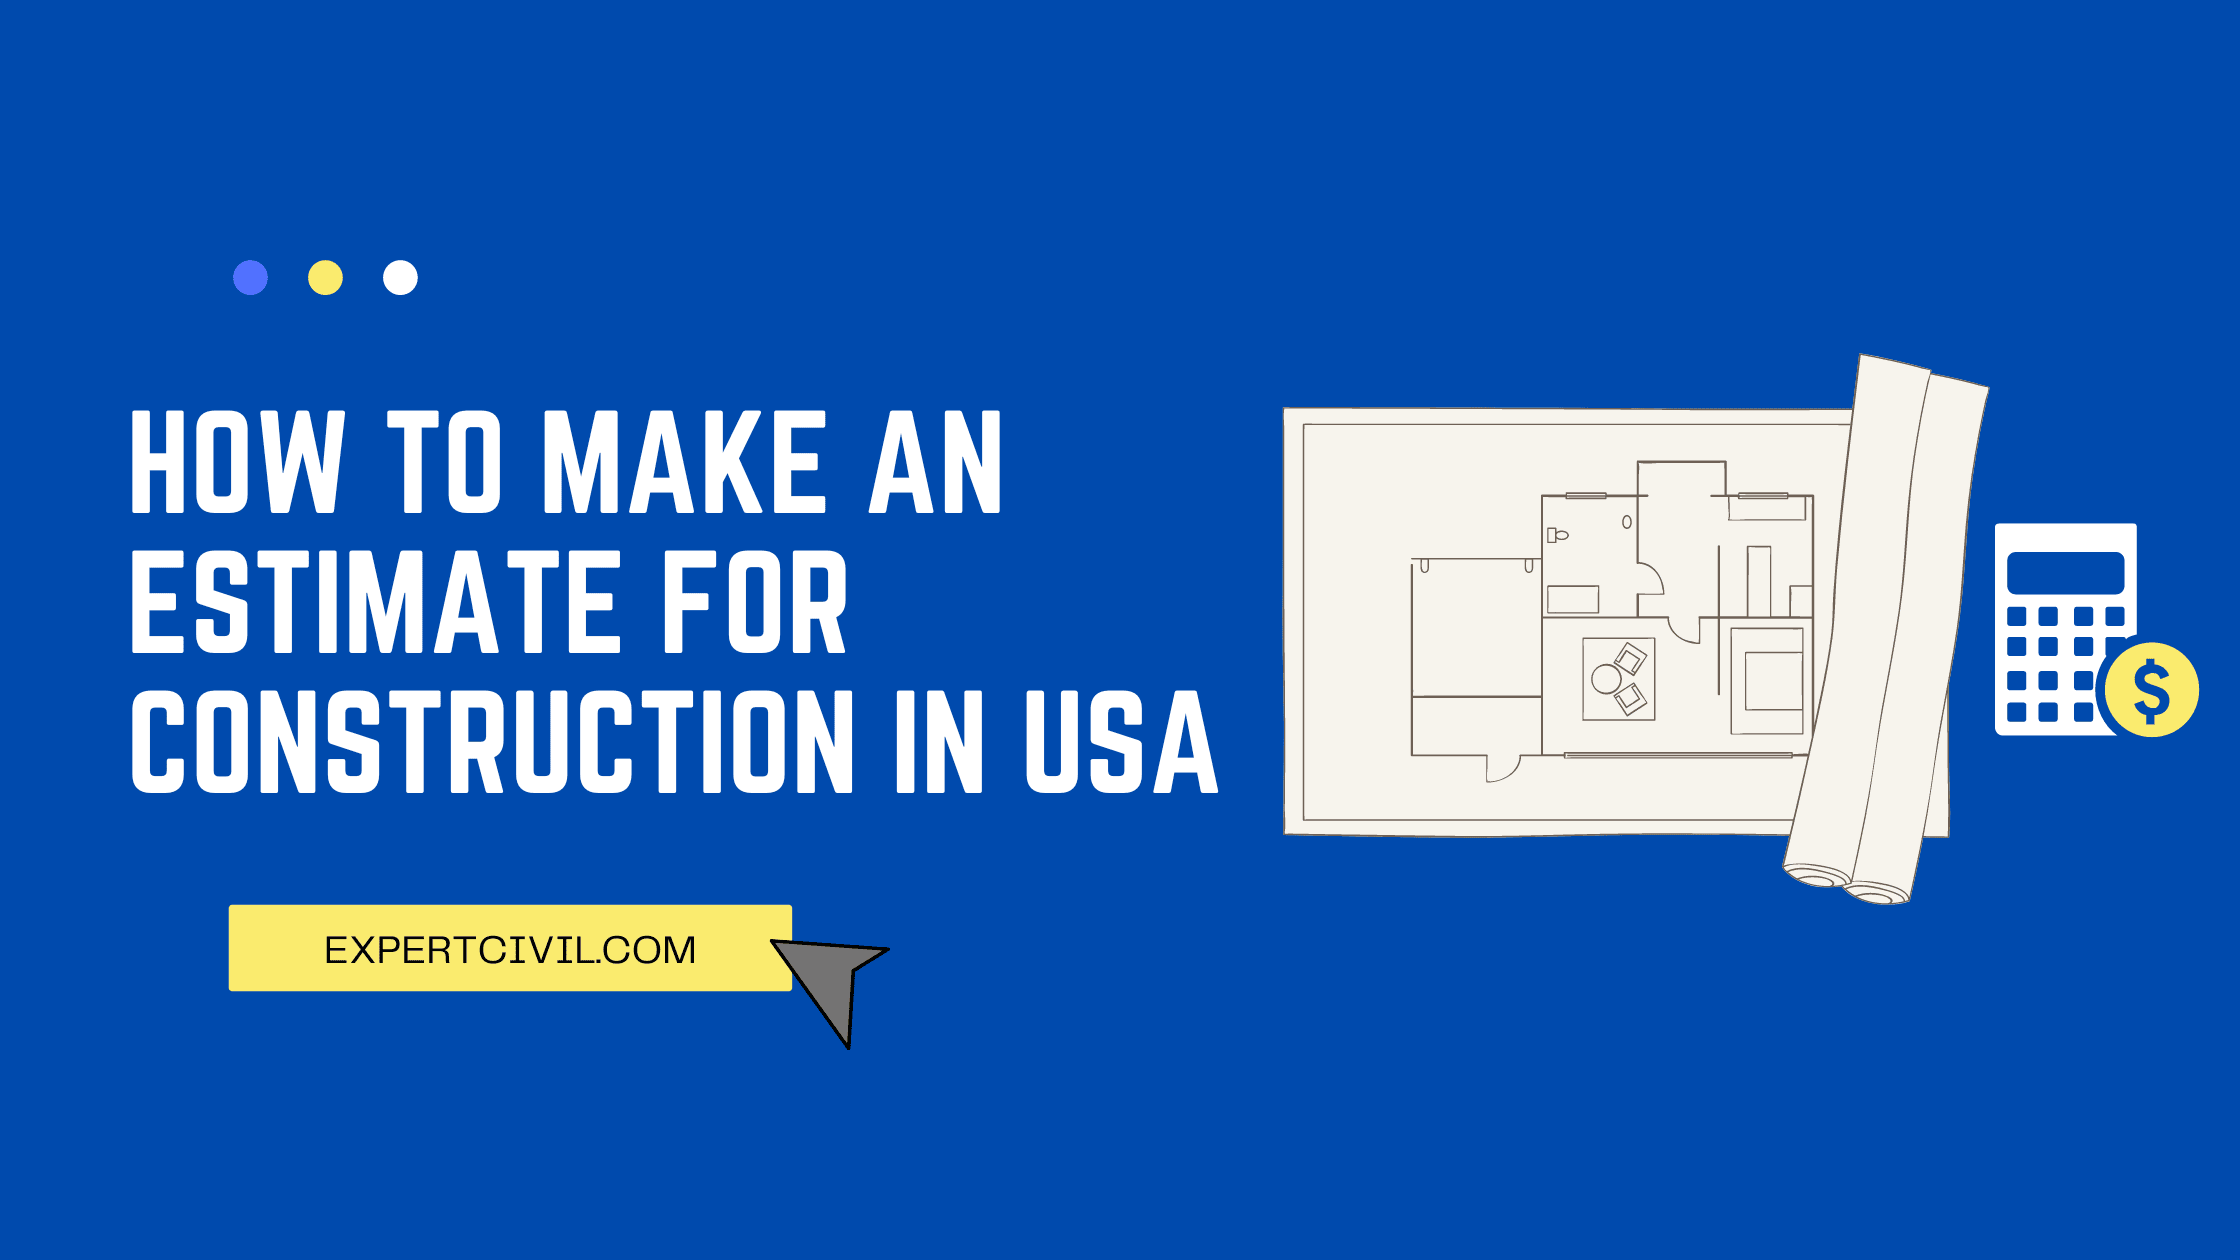 How To Make an Estimate For Construction In USA